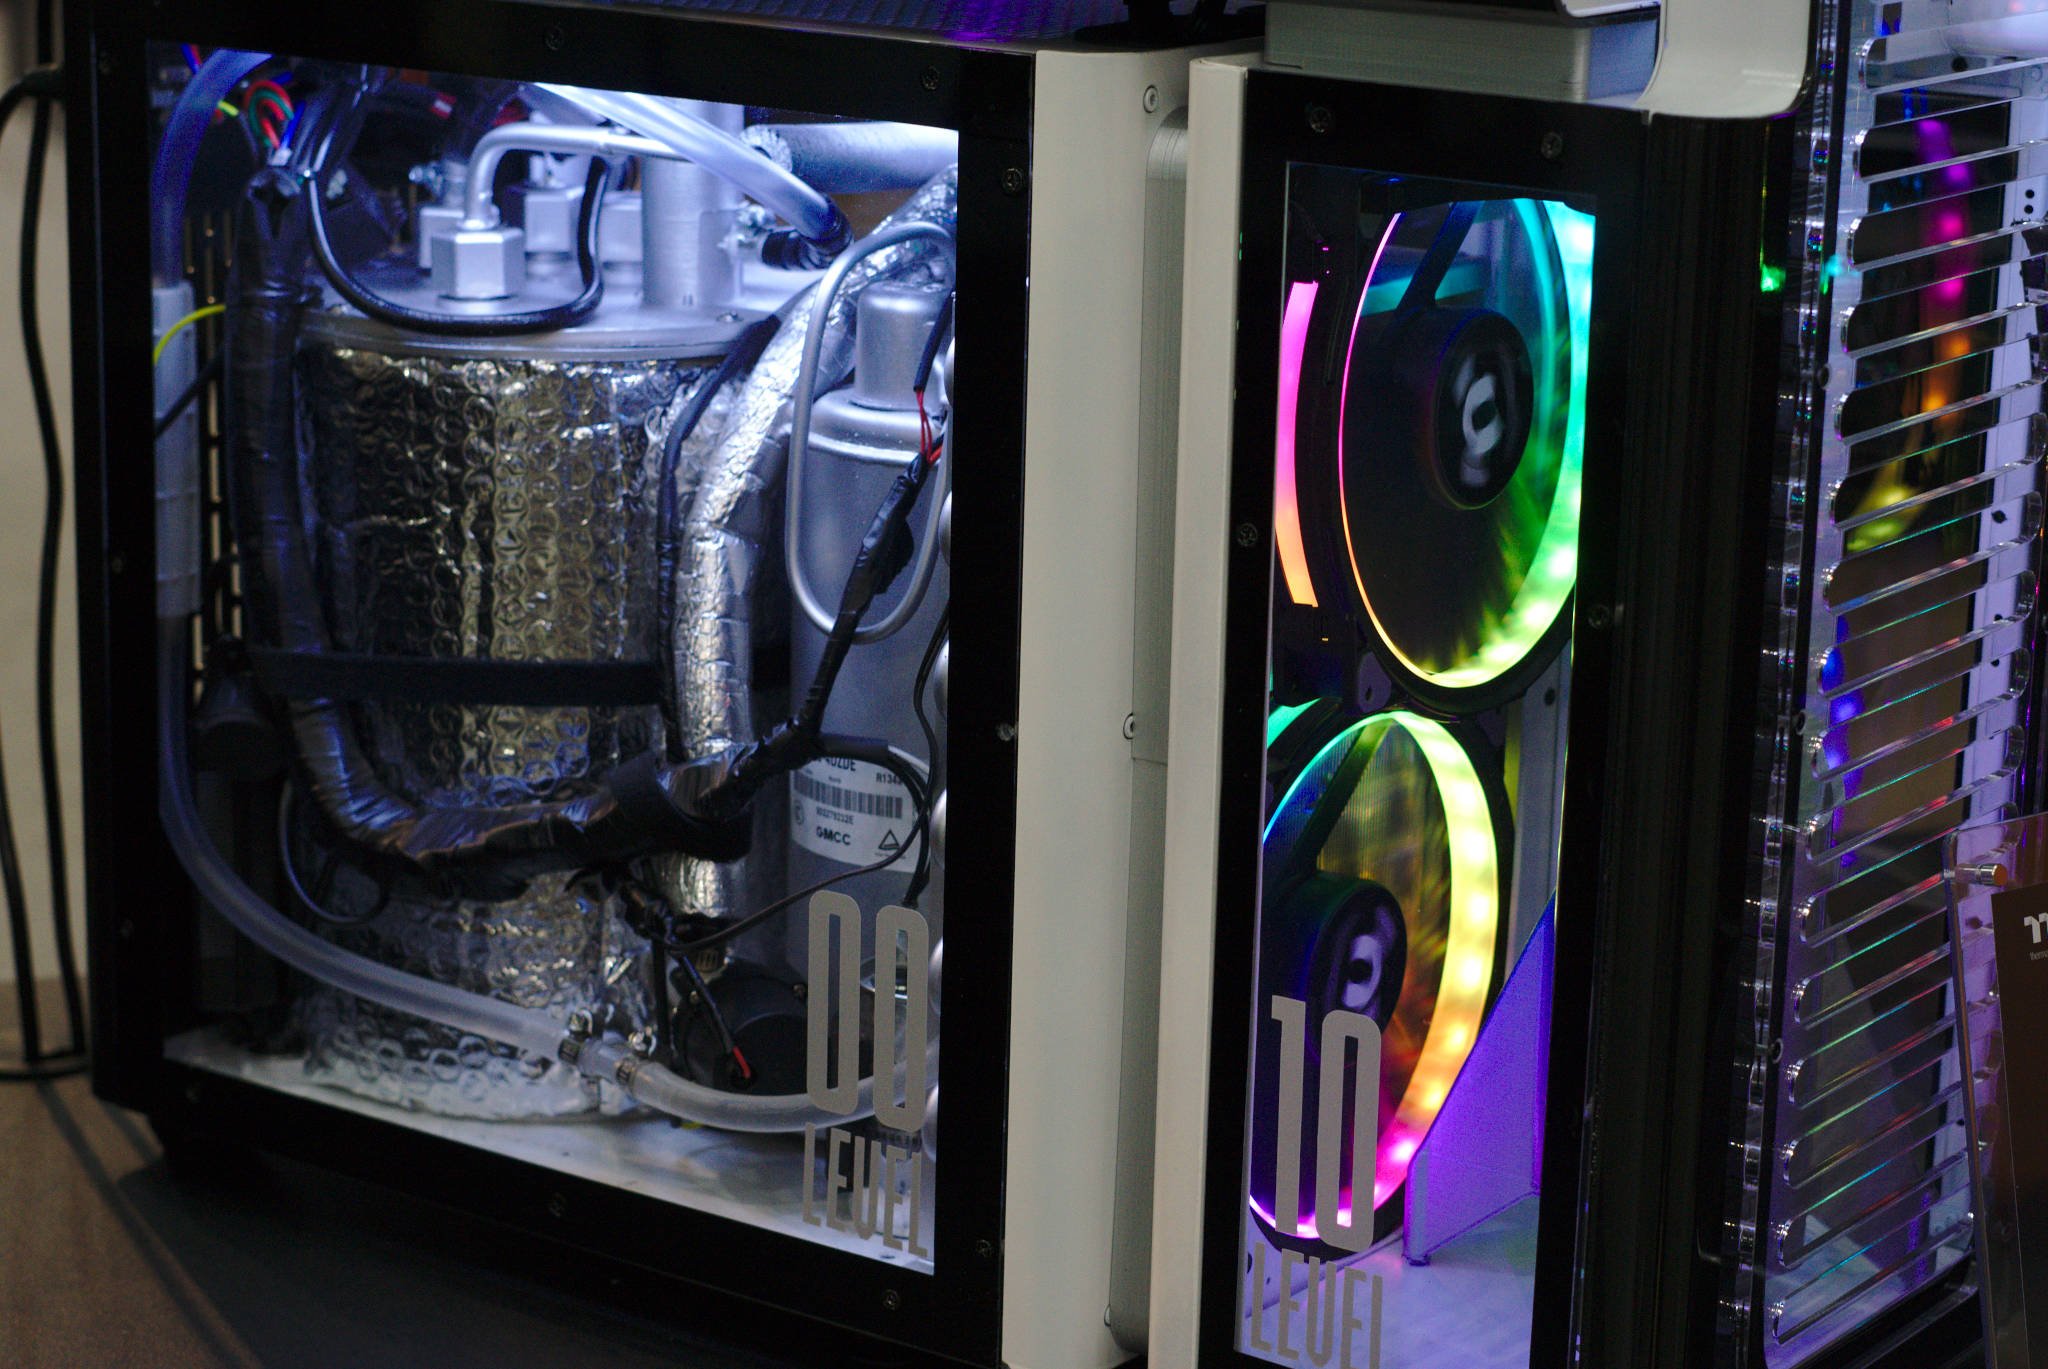 ITX vs. Mid-tower vs. Full-tower: Comparing different PC case sizes